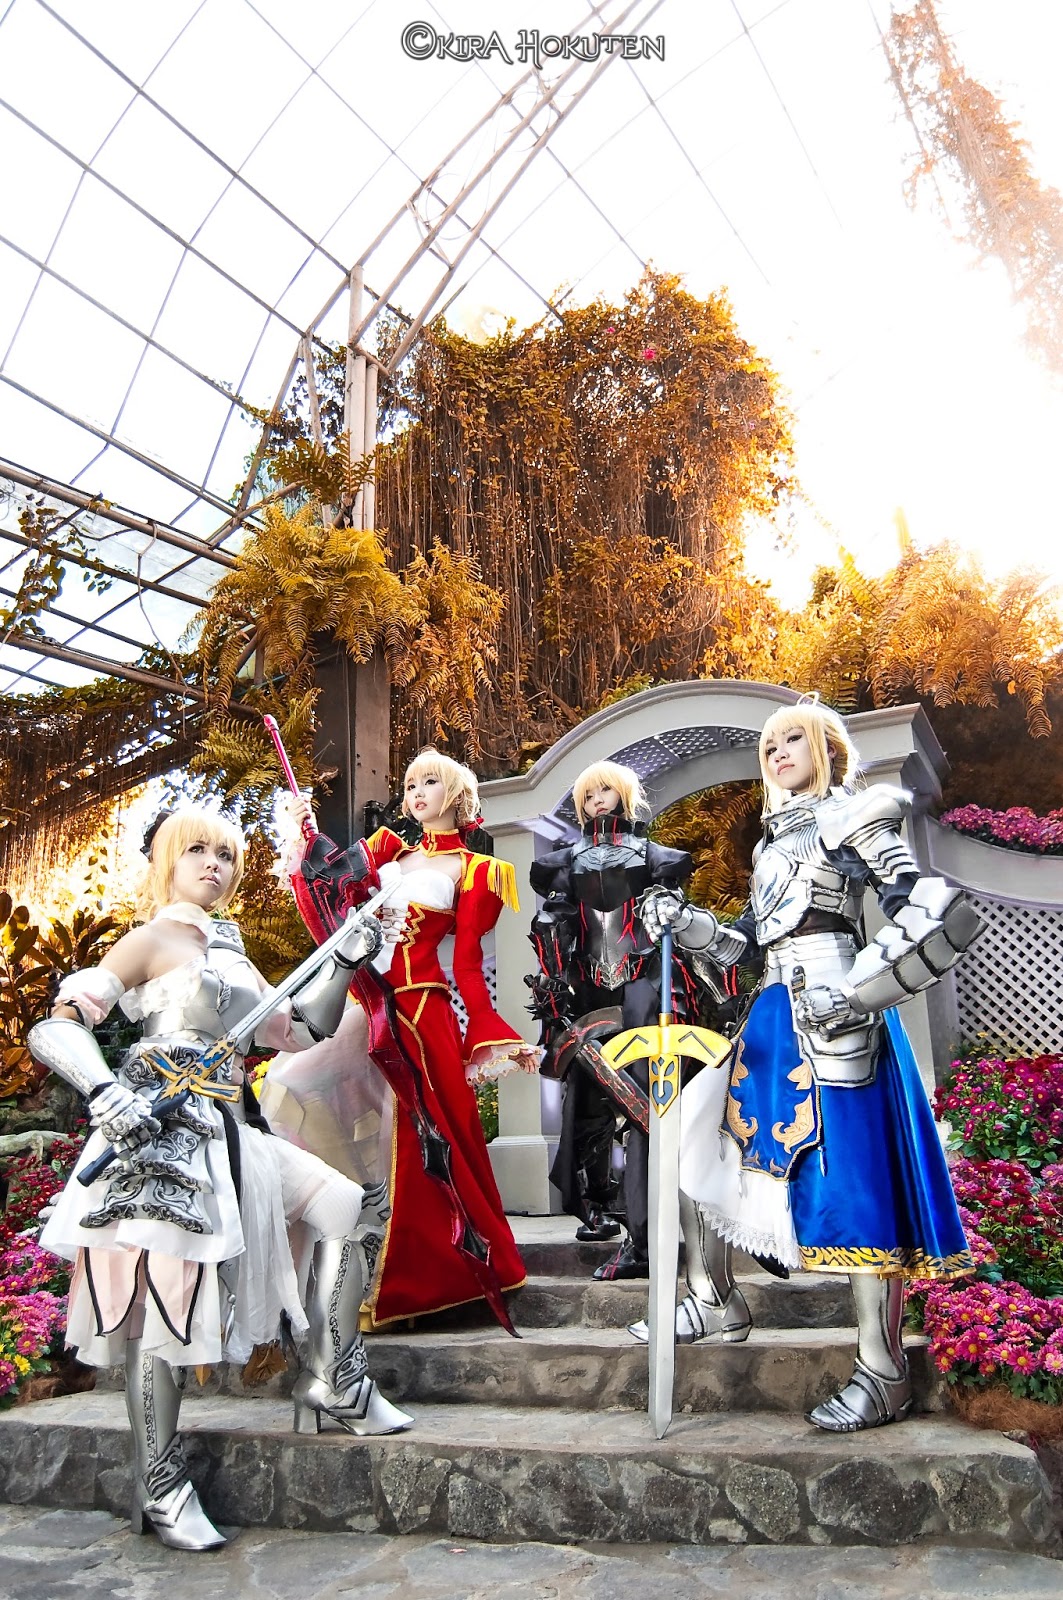 People 1063x1600 Asian Japanese Japanese women women cosplay Fate series Fate/Grand Order Fate/Extra Fate/Extra CCC Fate/Unlimited Codes  Fate/Stay Night Artoria Pendragon Saber Saber Alter Saber Lily Nero Claudius blonde long hair Excalibur